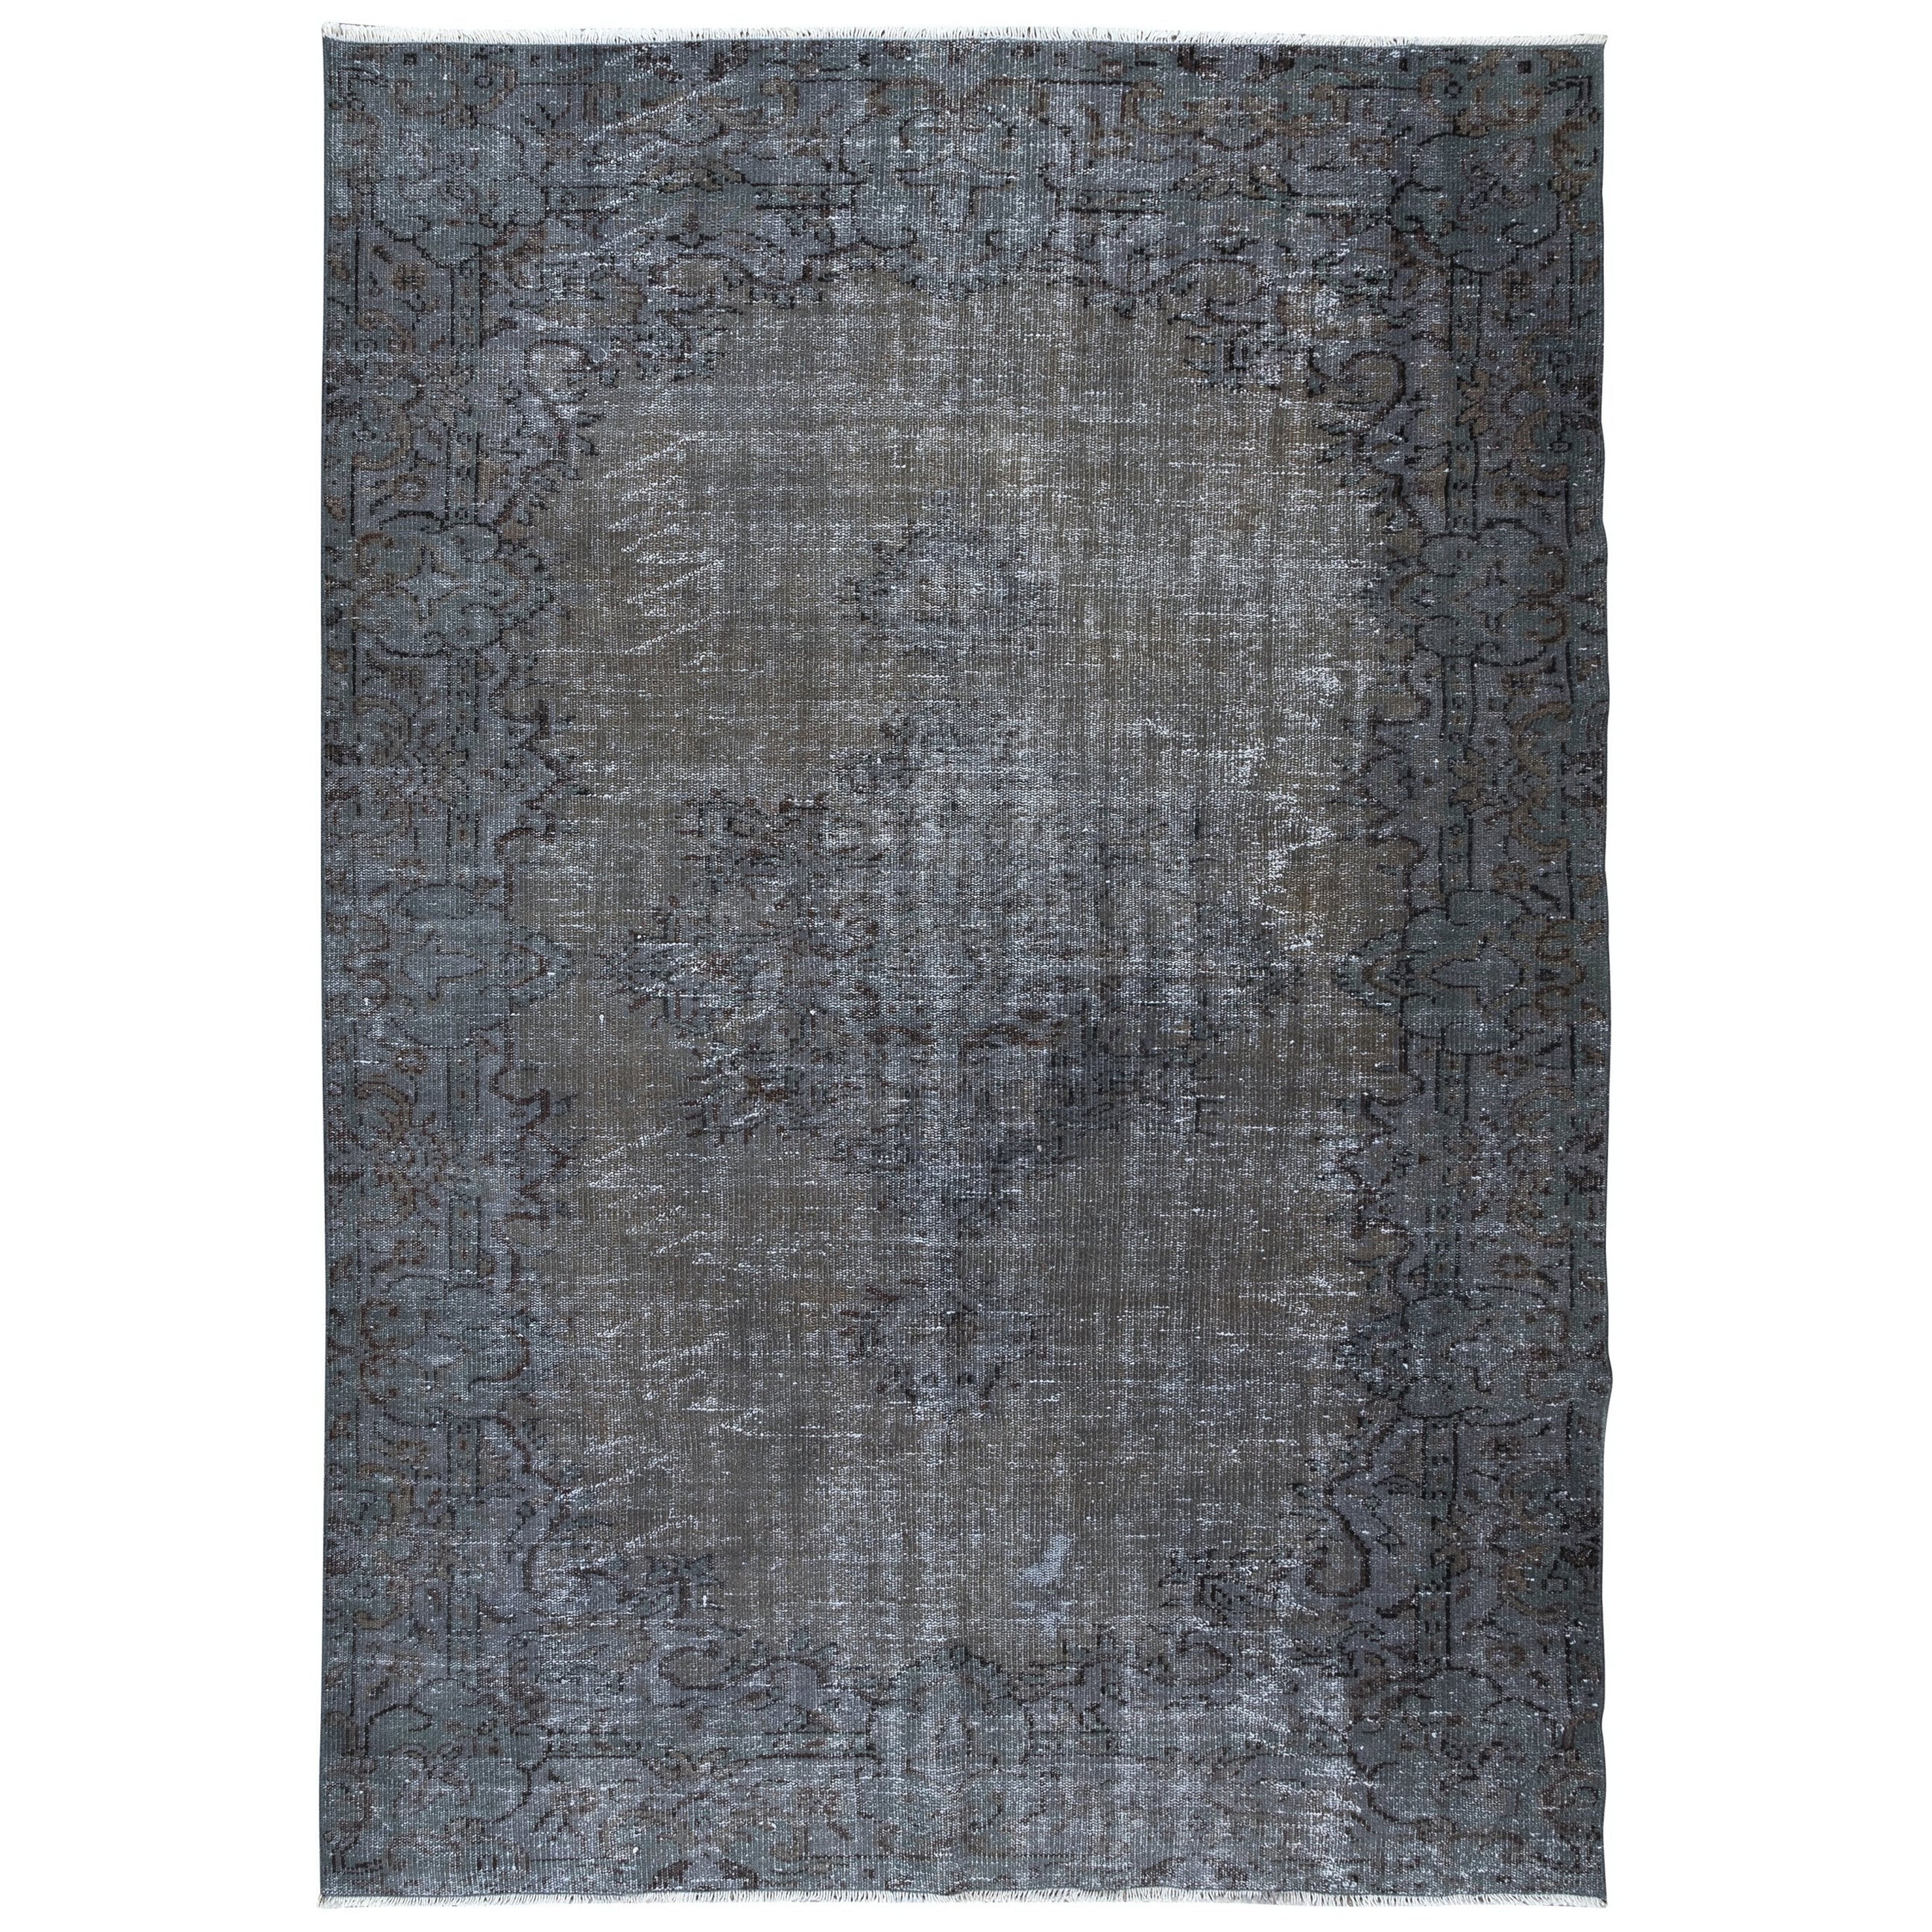 6x8.5 Ft Gray Modern Area Rug with Medallion, Handknotted in Isparta, Turkey